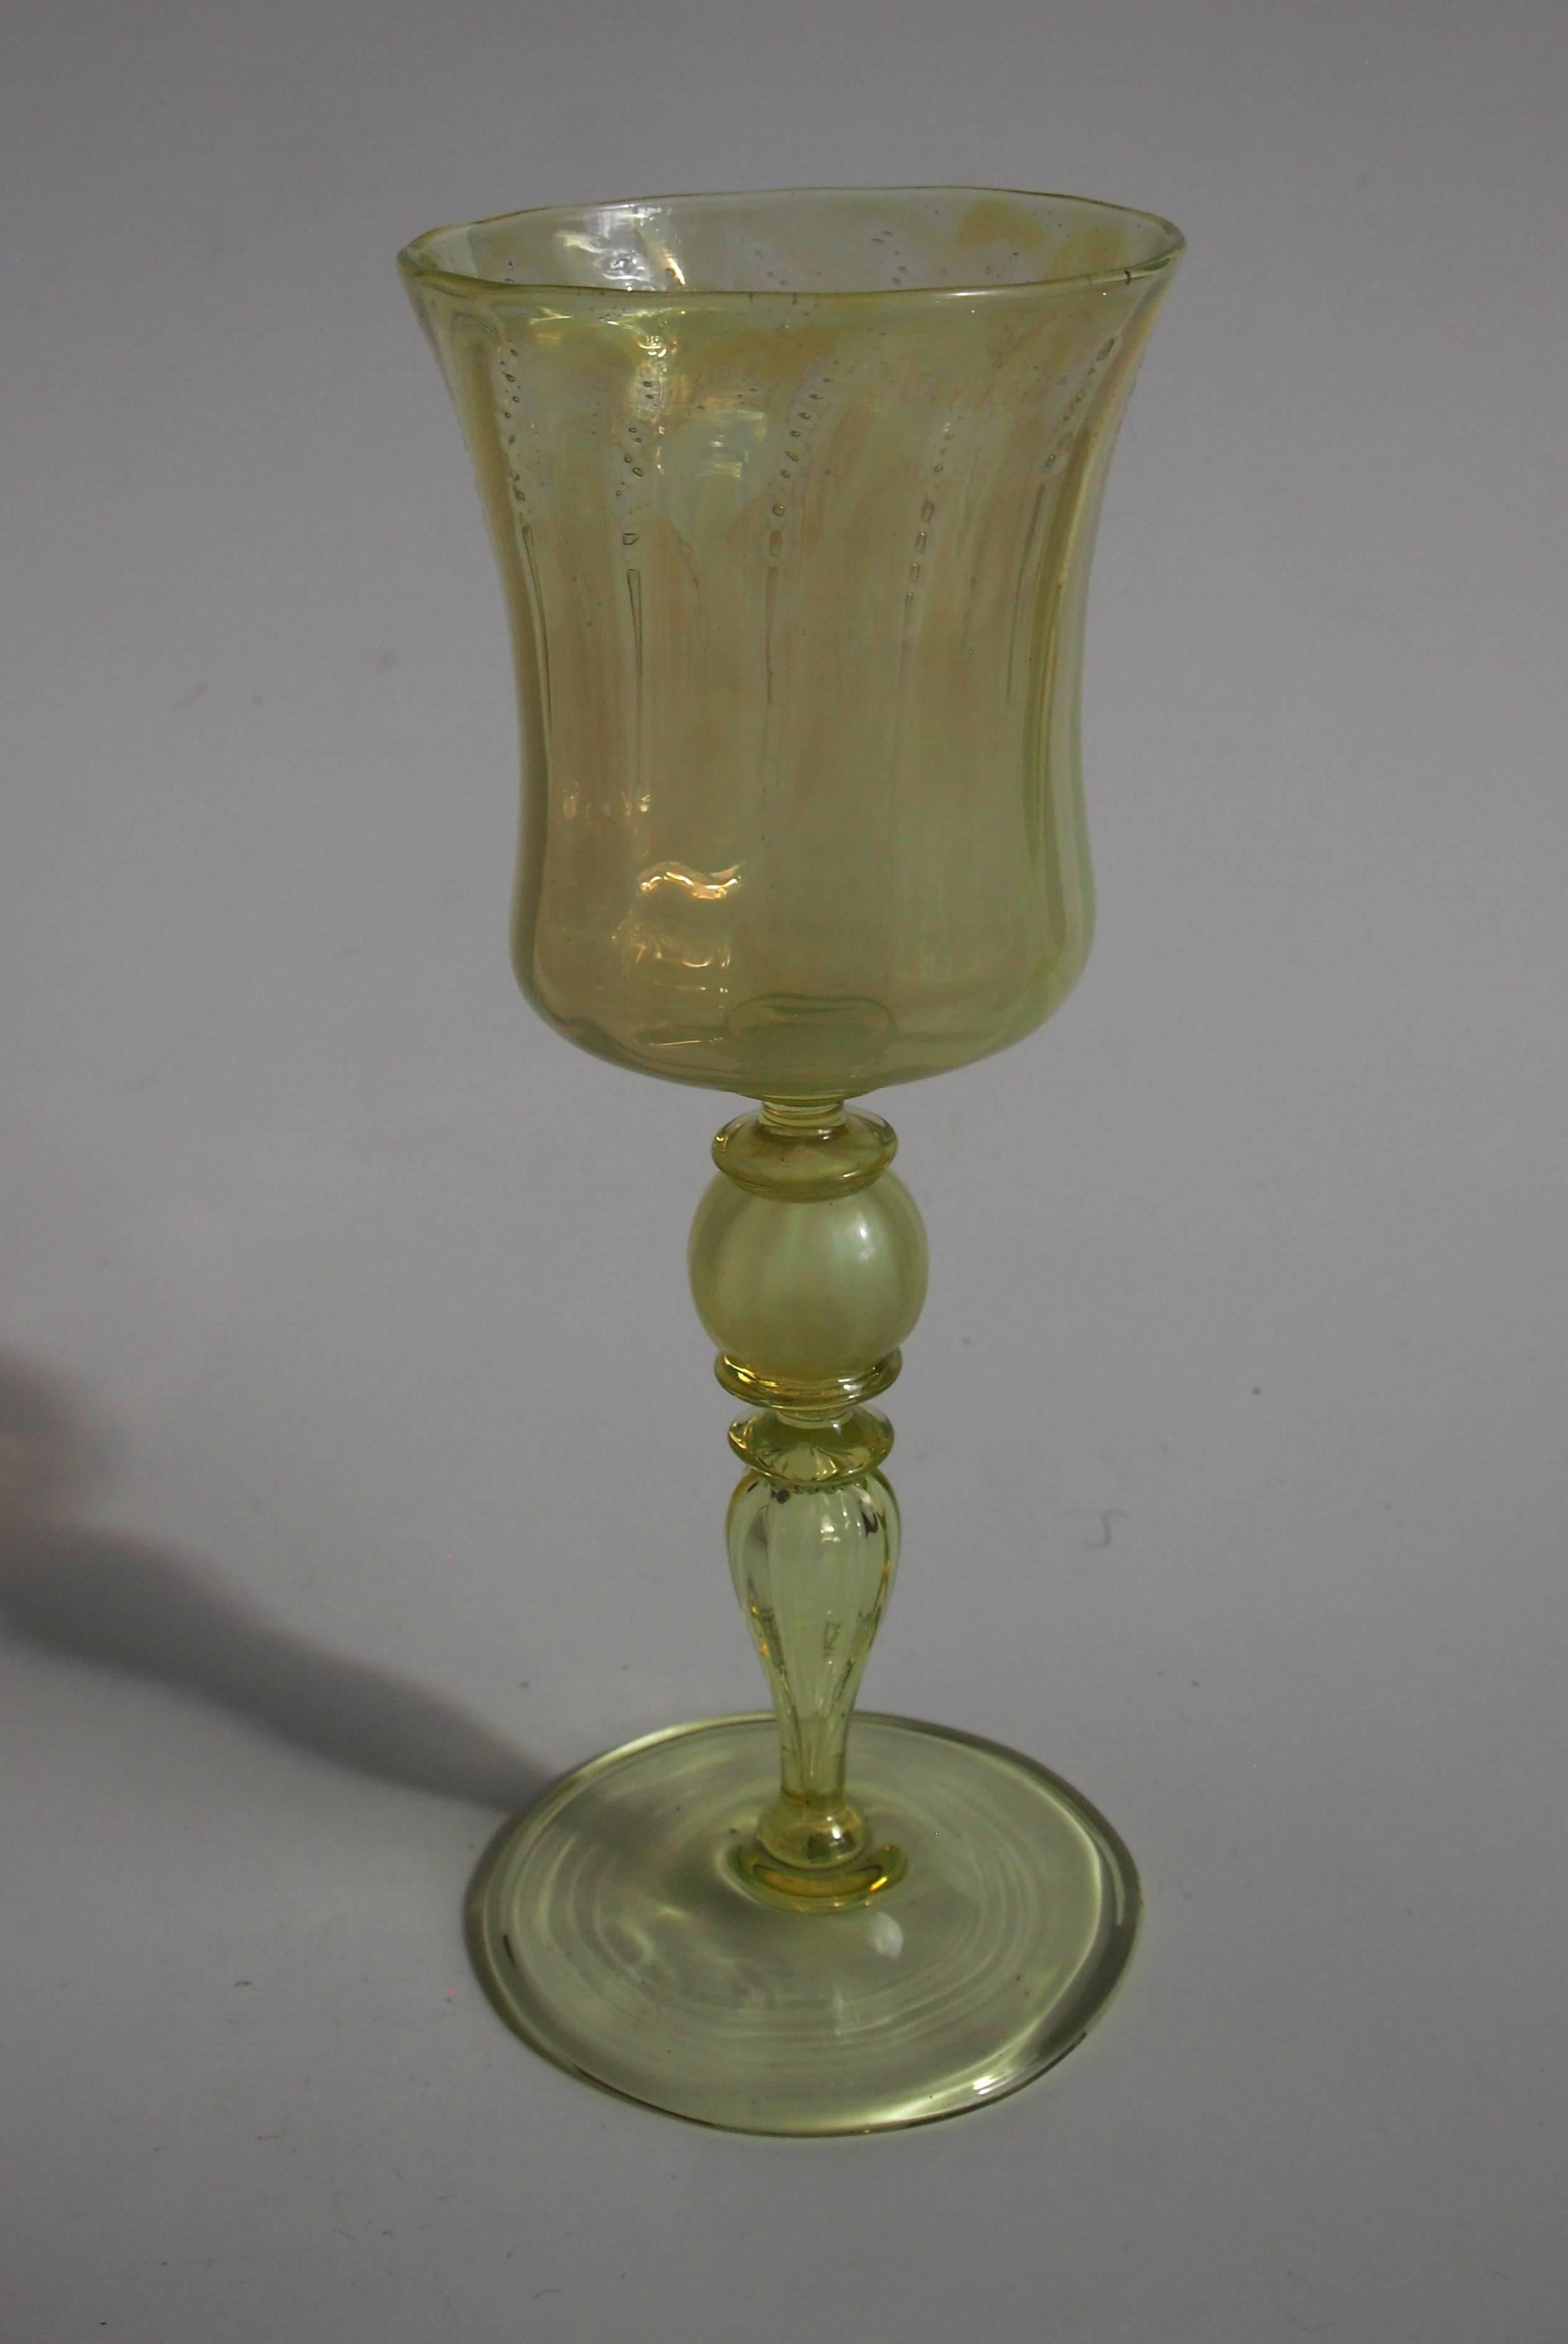 A very rare and important straw opal Louis Comfort Tiffany Favrile large wine glass. Beautifully signed 'L.C.Tiffany Favrile' -on the base at the tip of the stem See picture 6. Its rare to find such beautiful opalescence in Tiffany's work. With fine